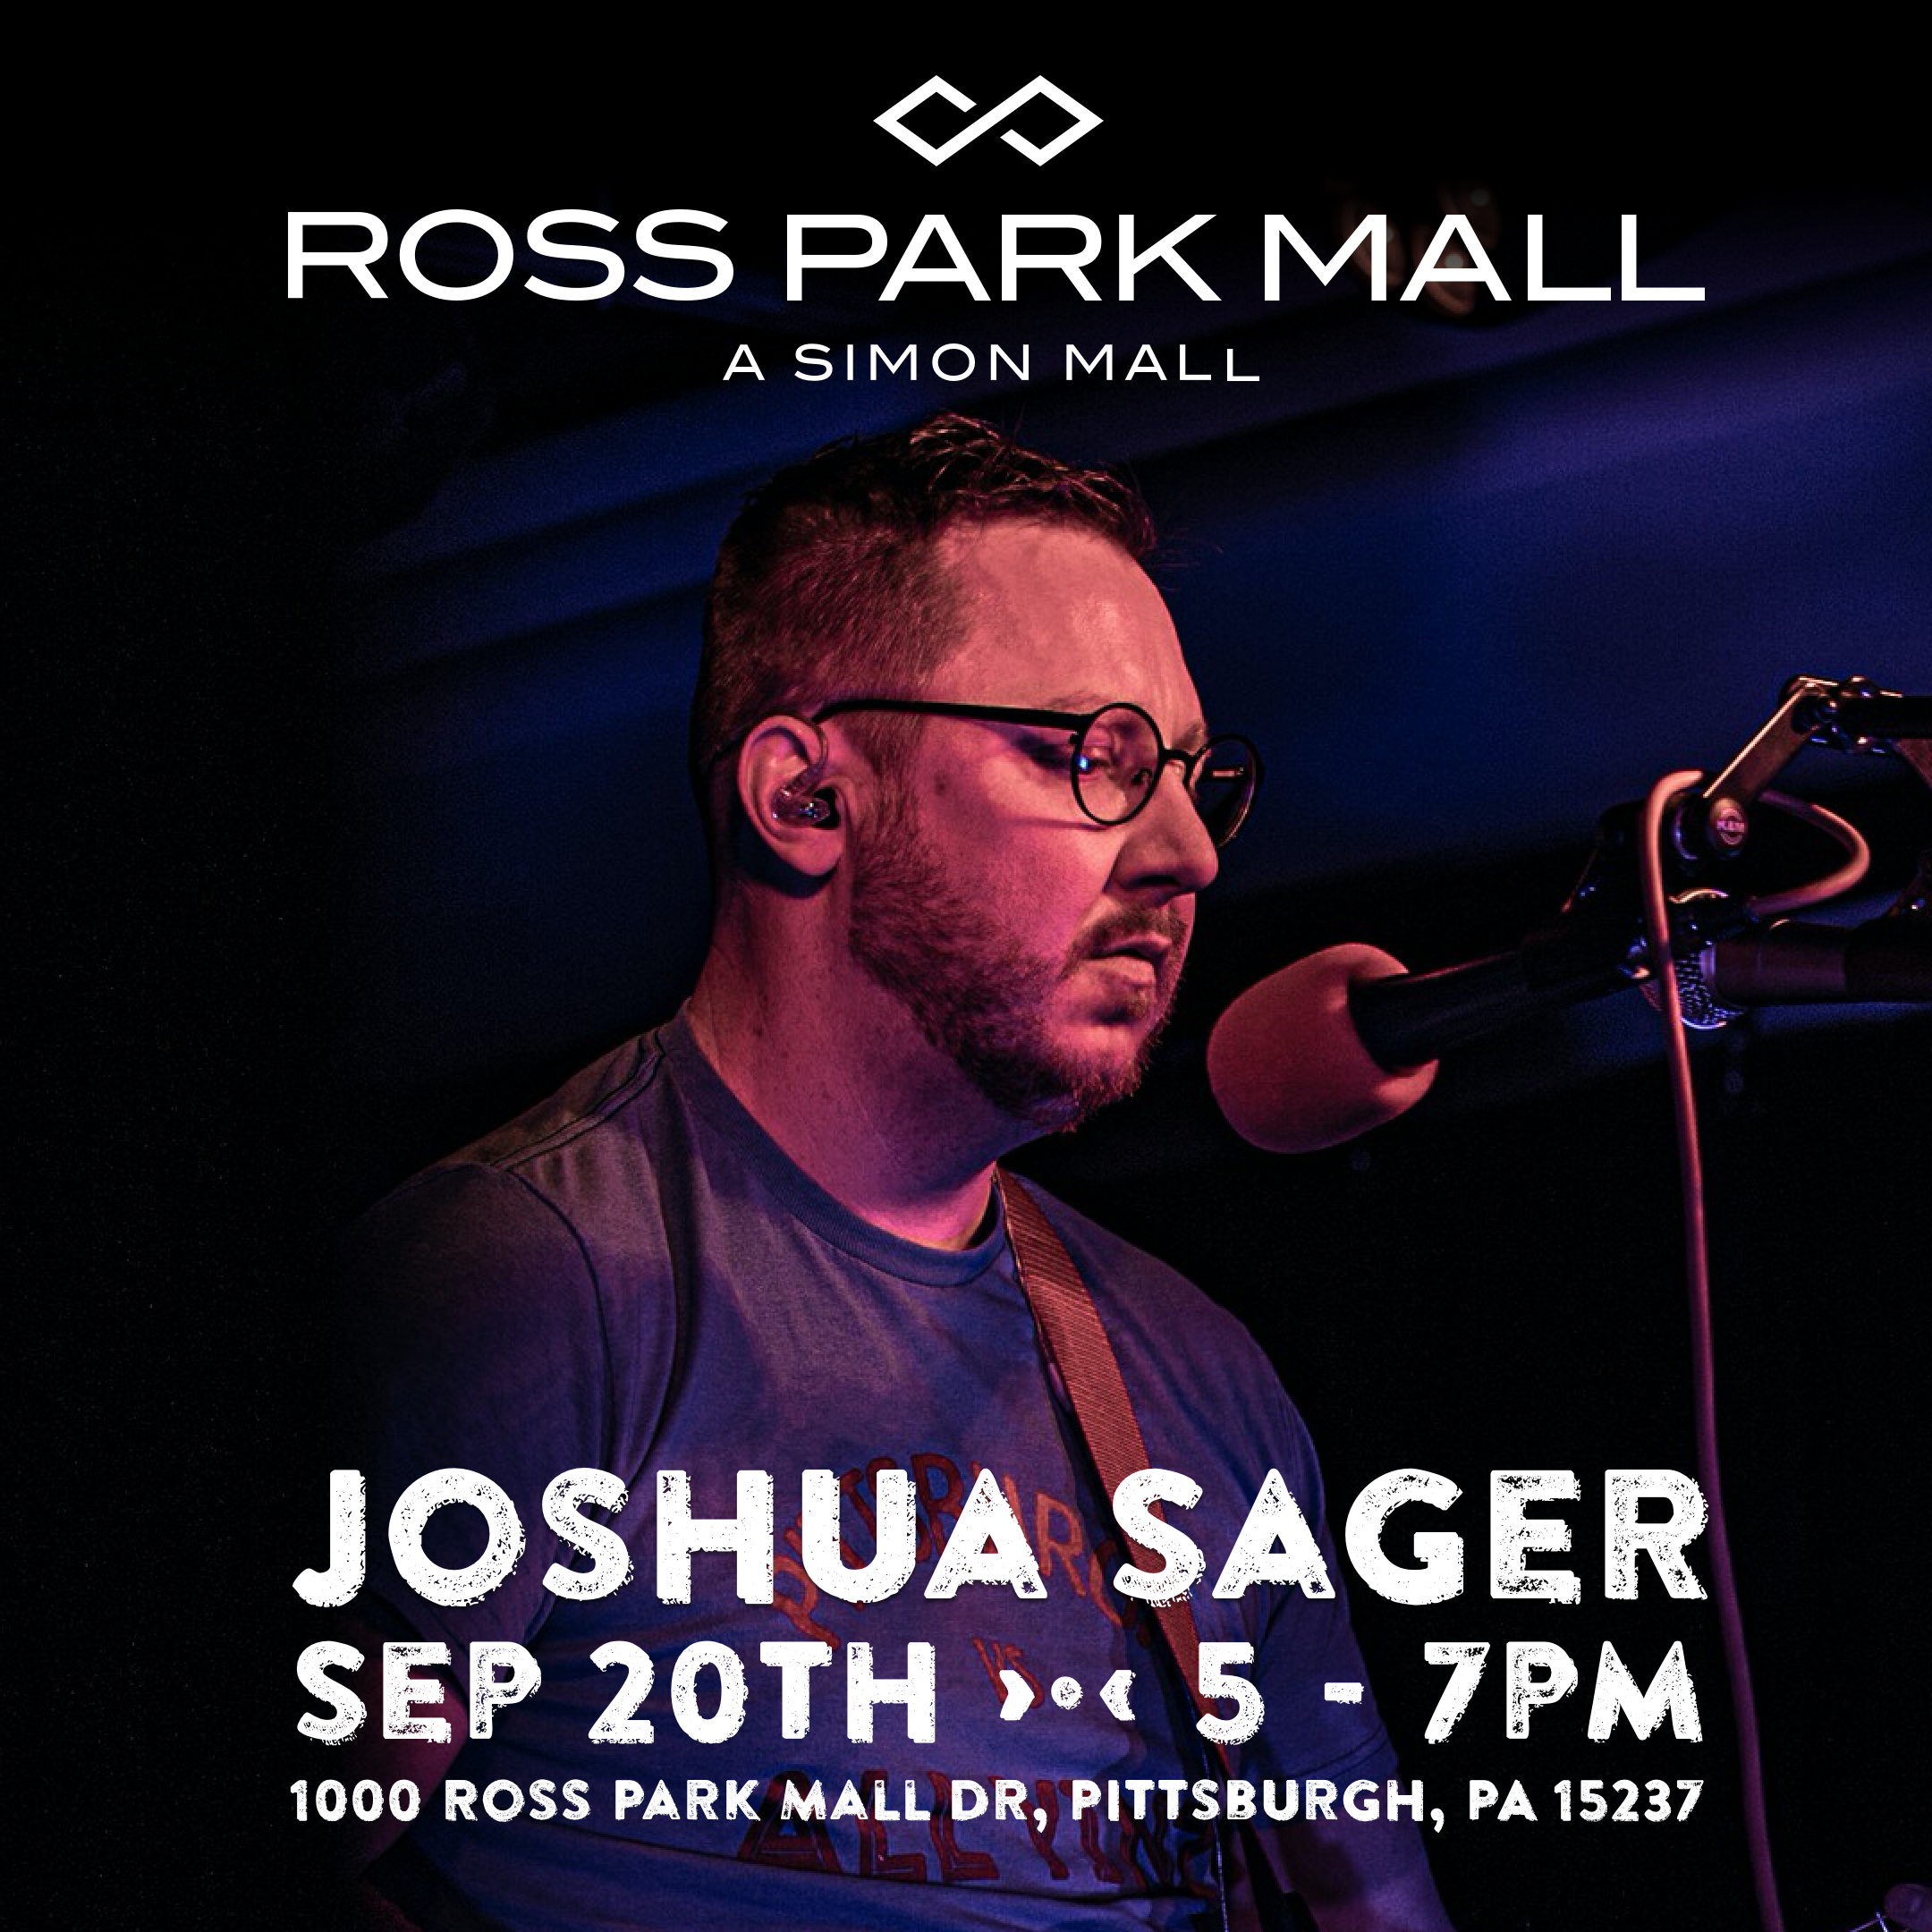 Joshua Sager will be performing at the Ross Park Mall on September 20th from 5 - 7pm